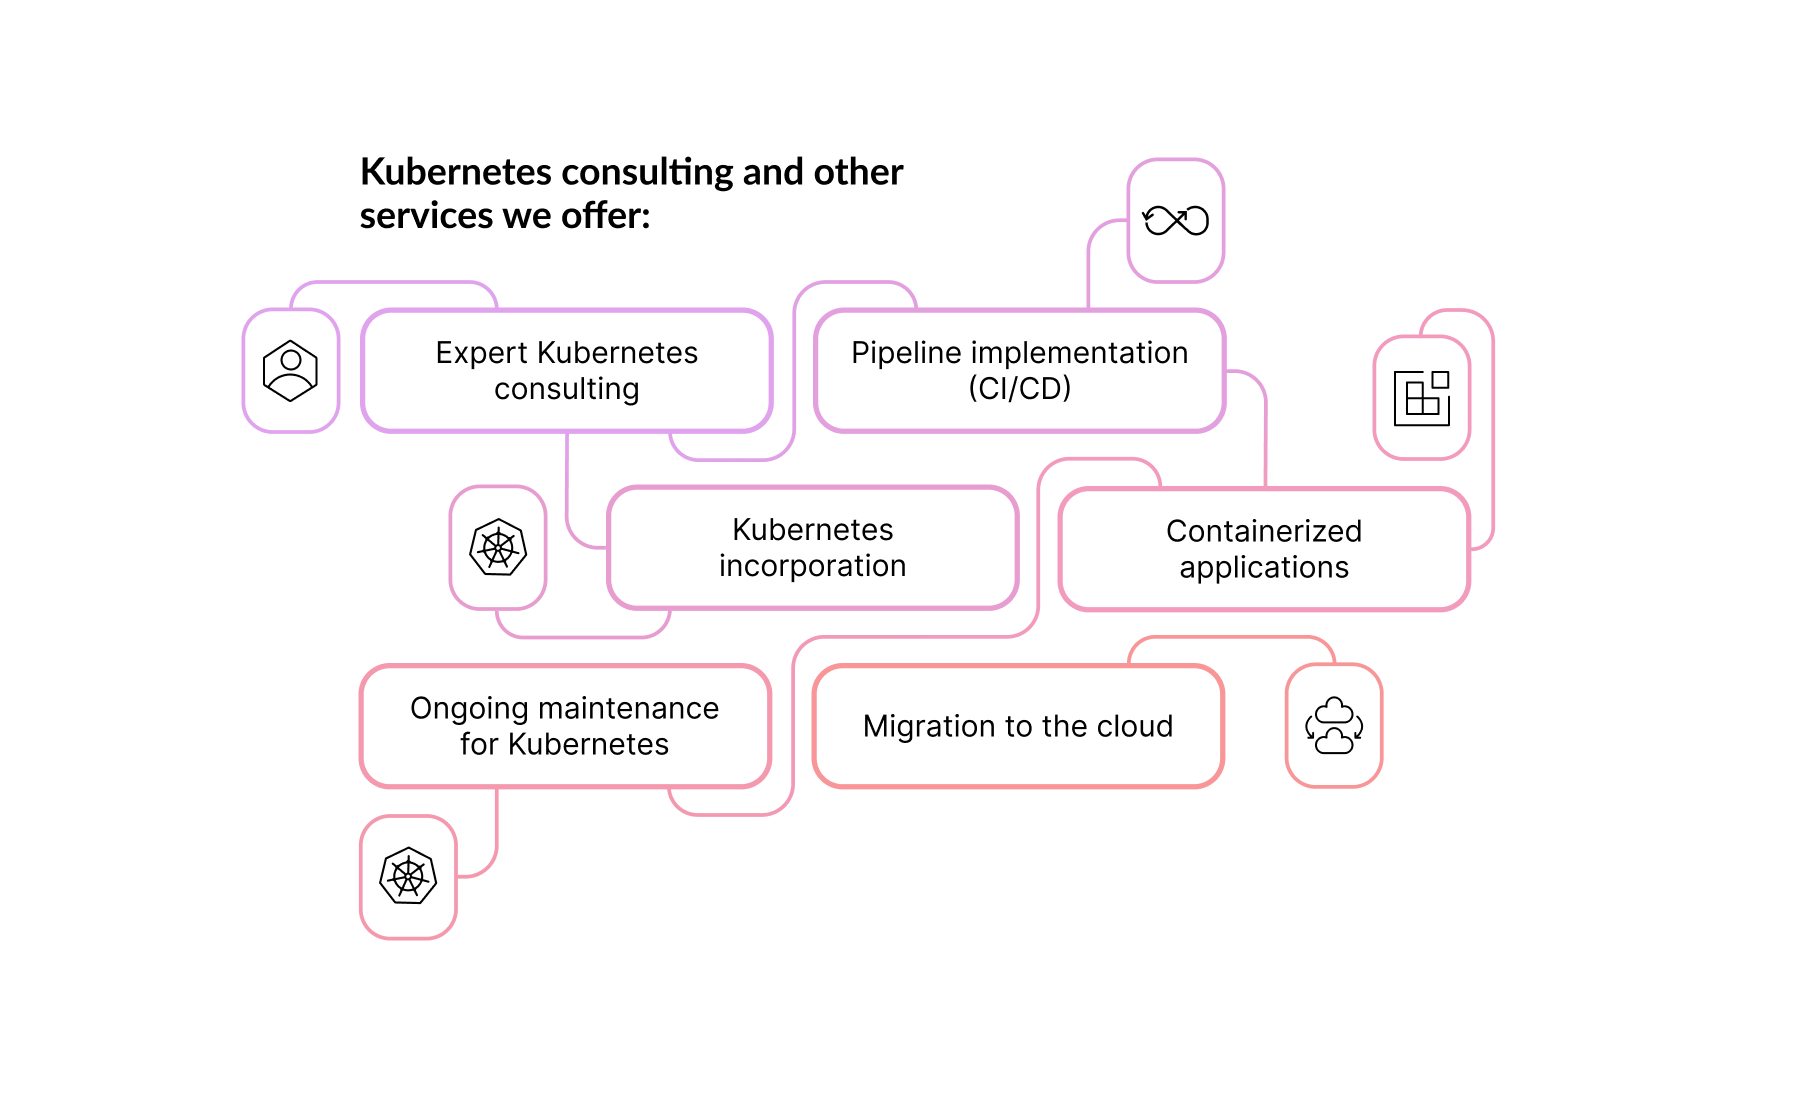 Expert Kubernetes consulting and services we offer